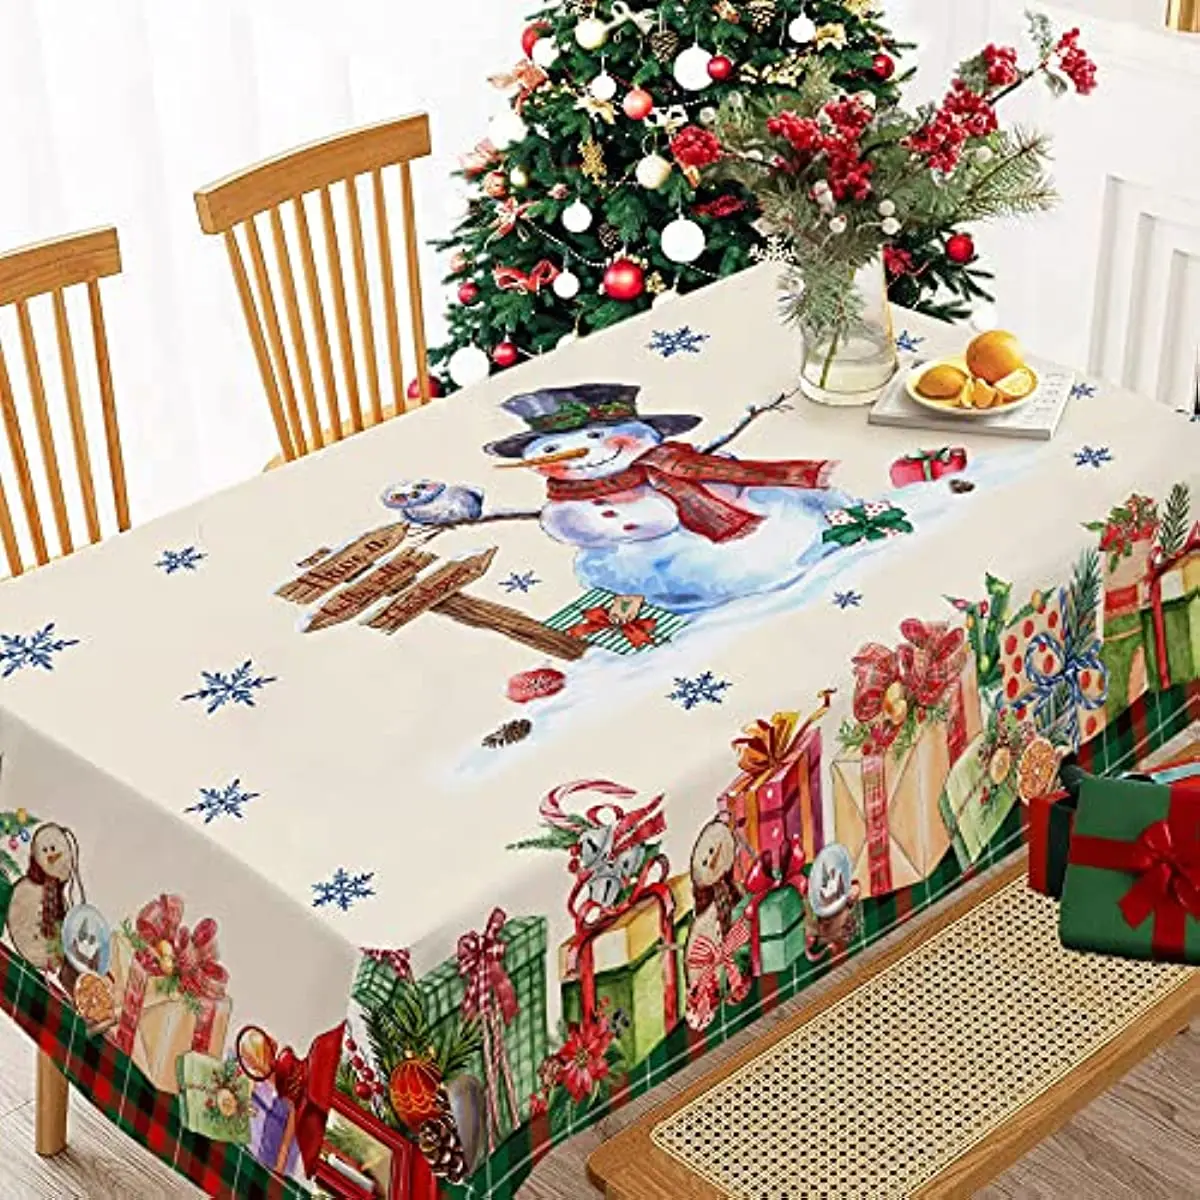 Christmas Snowman Waterproof Rectangular Tablecloth Table Decor Anti-stain Winter Holiday Tablecloth for Christmas Decoration